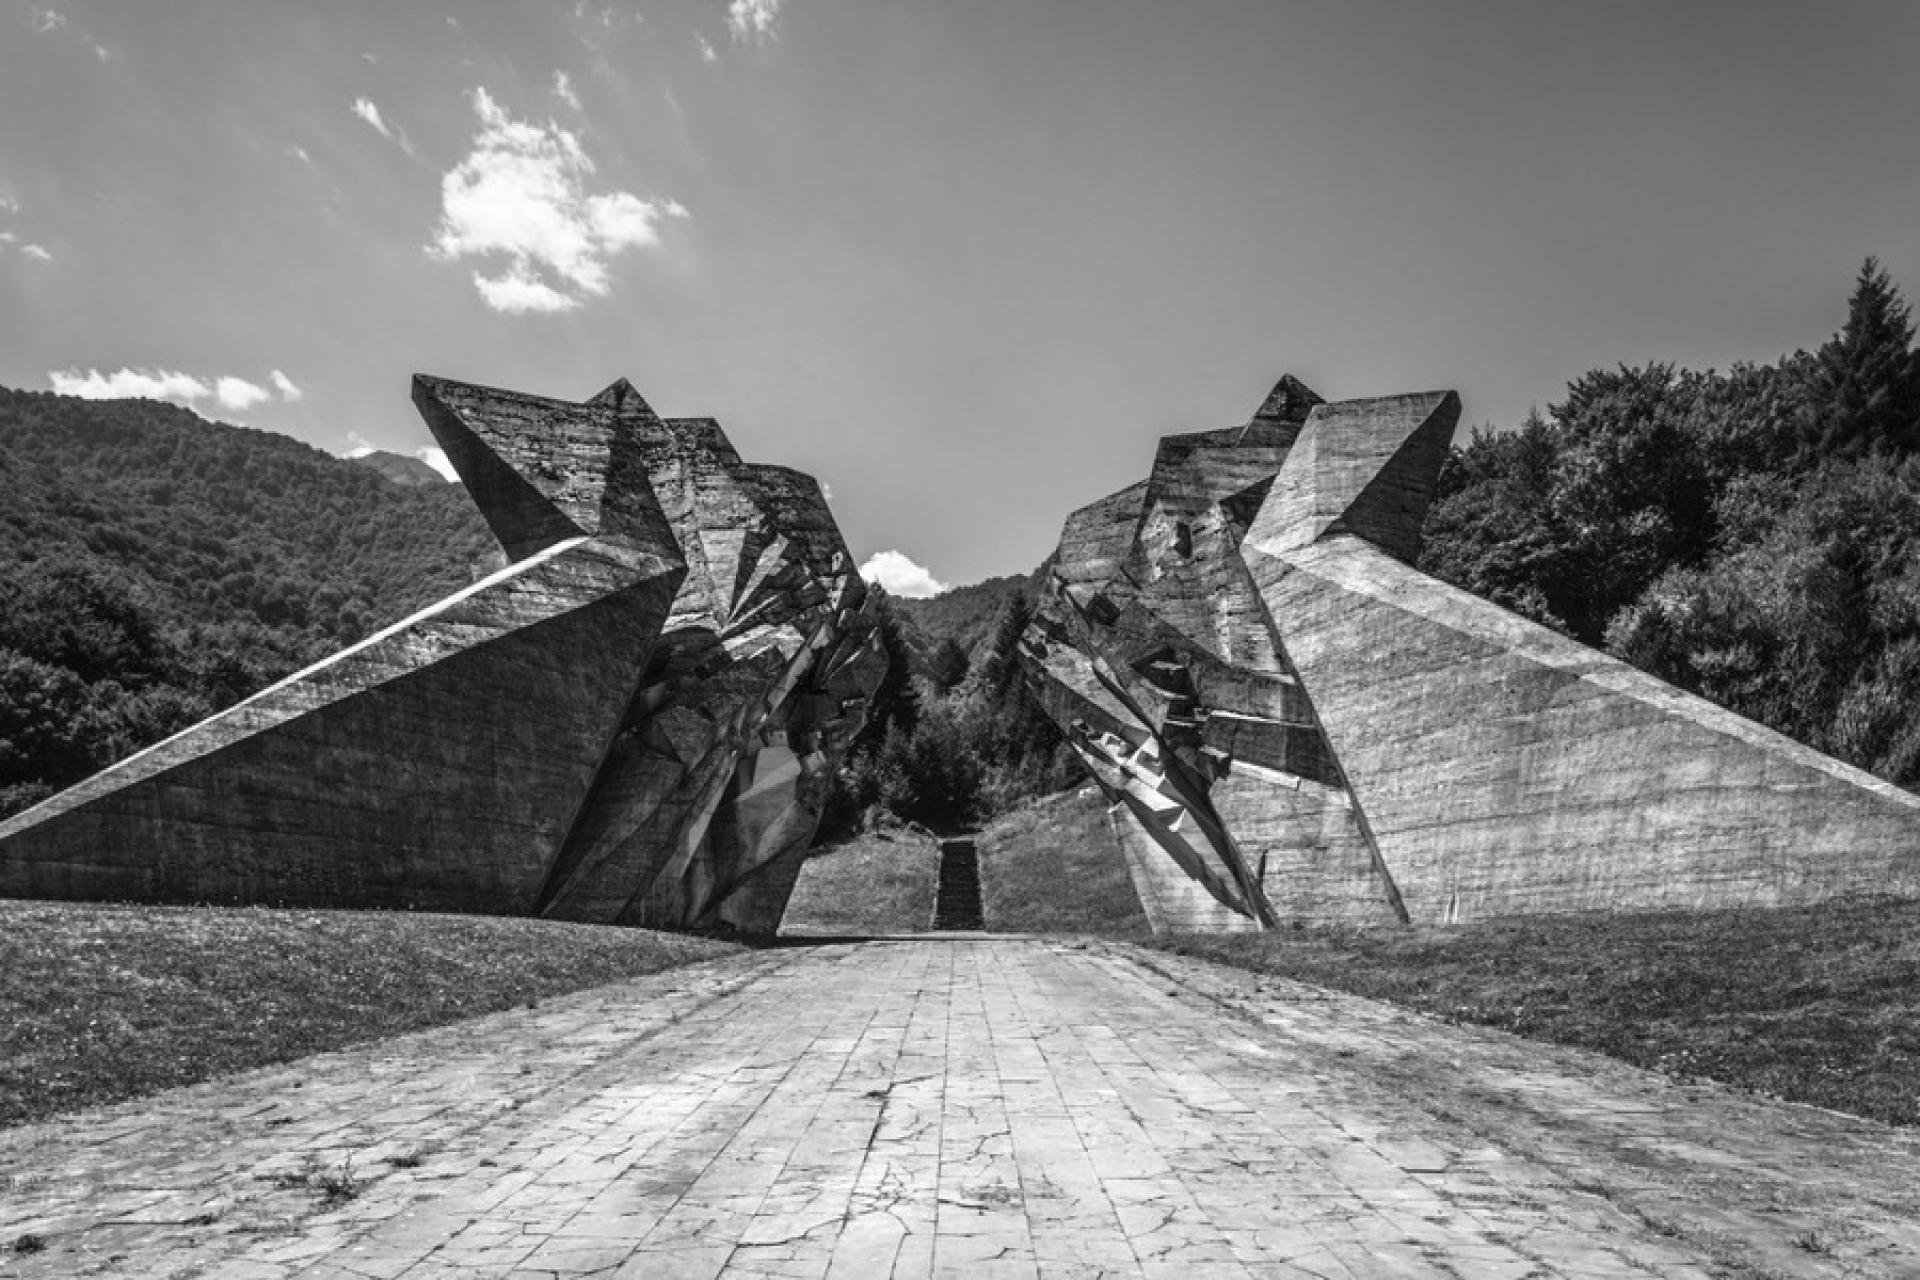 In memory of the Battle of Sutjeska one of the best sculptural memorials in the former Yugoslavian territory was created. | Photo © Roberto Conte